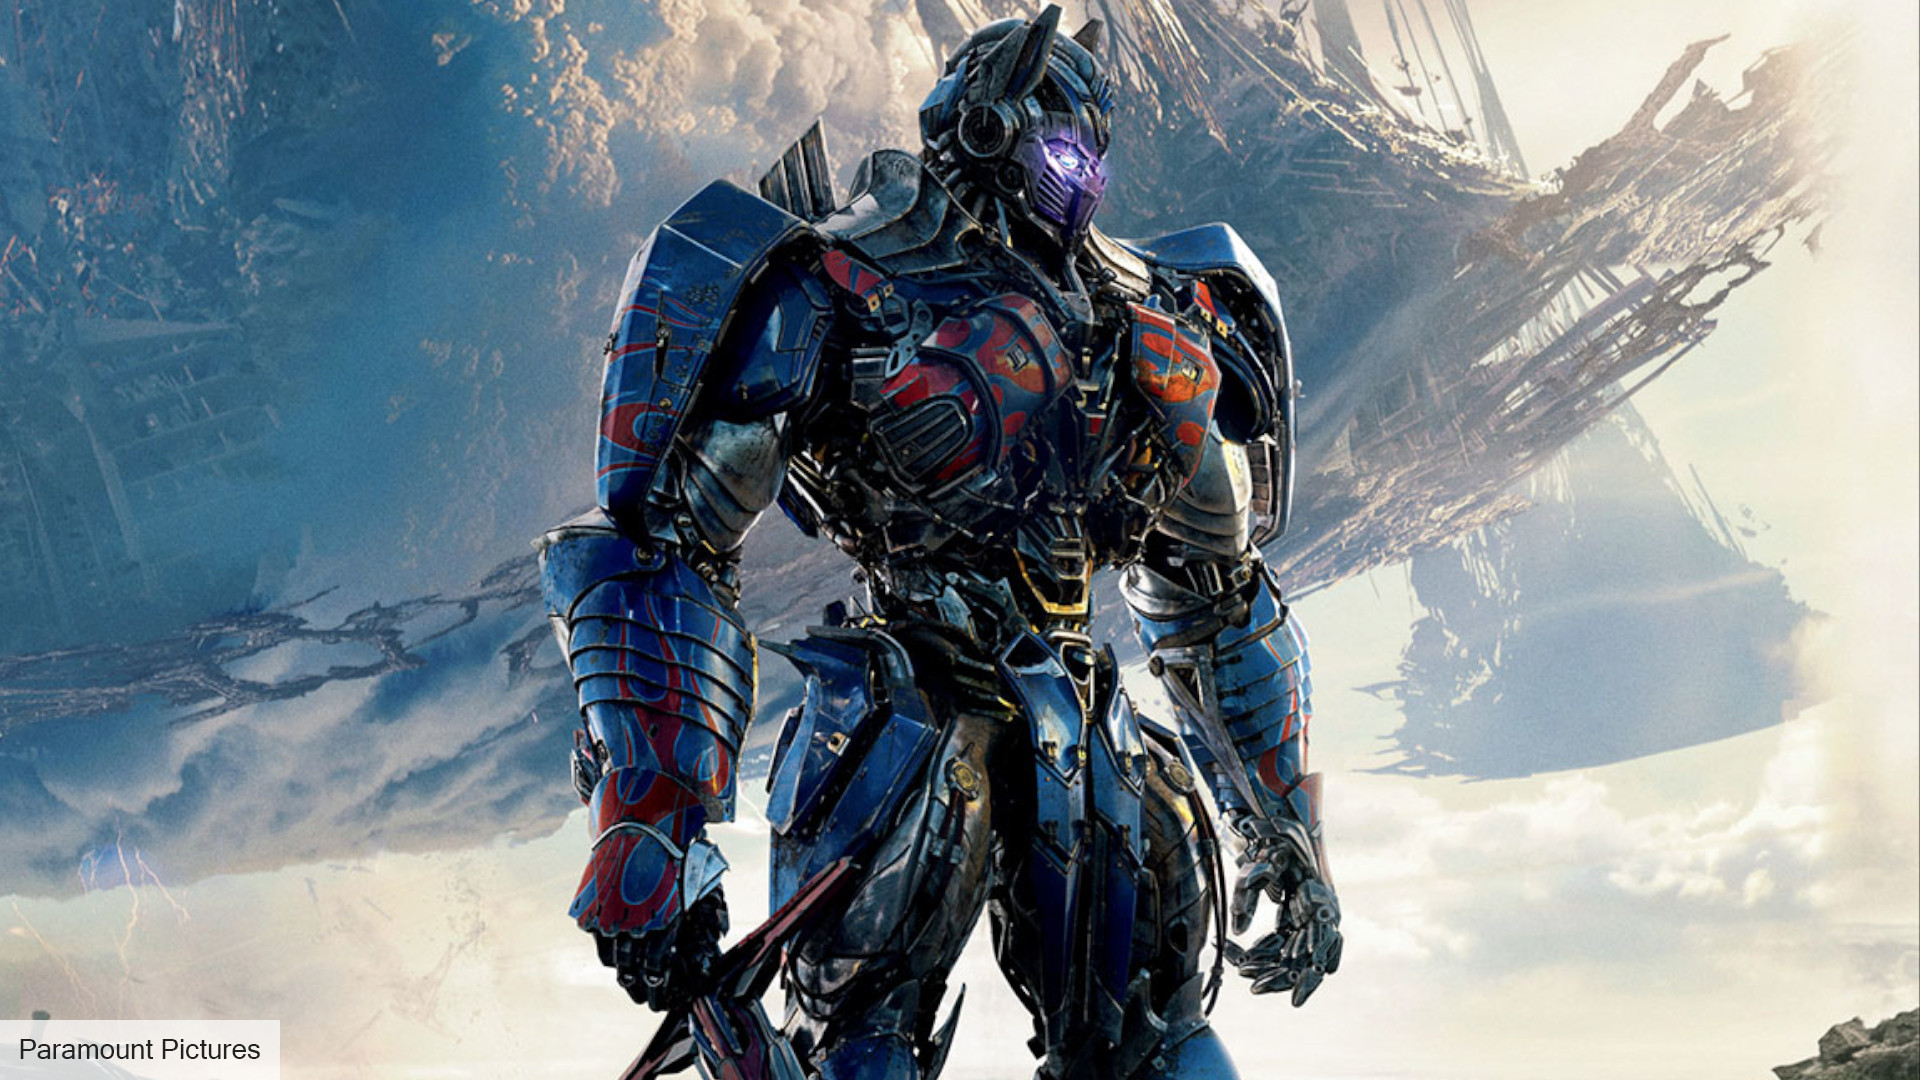 New Transformers movie based on Beast Wars, coming next year | The